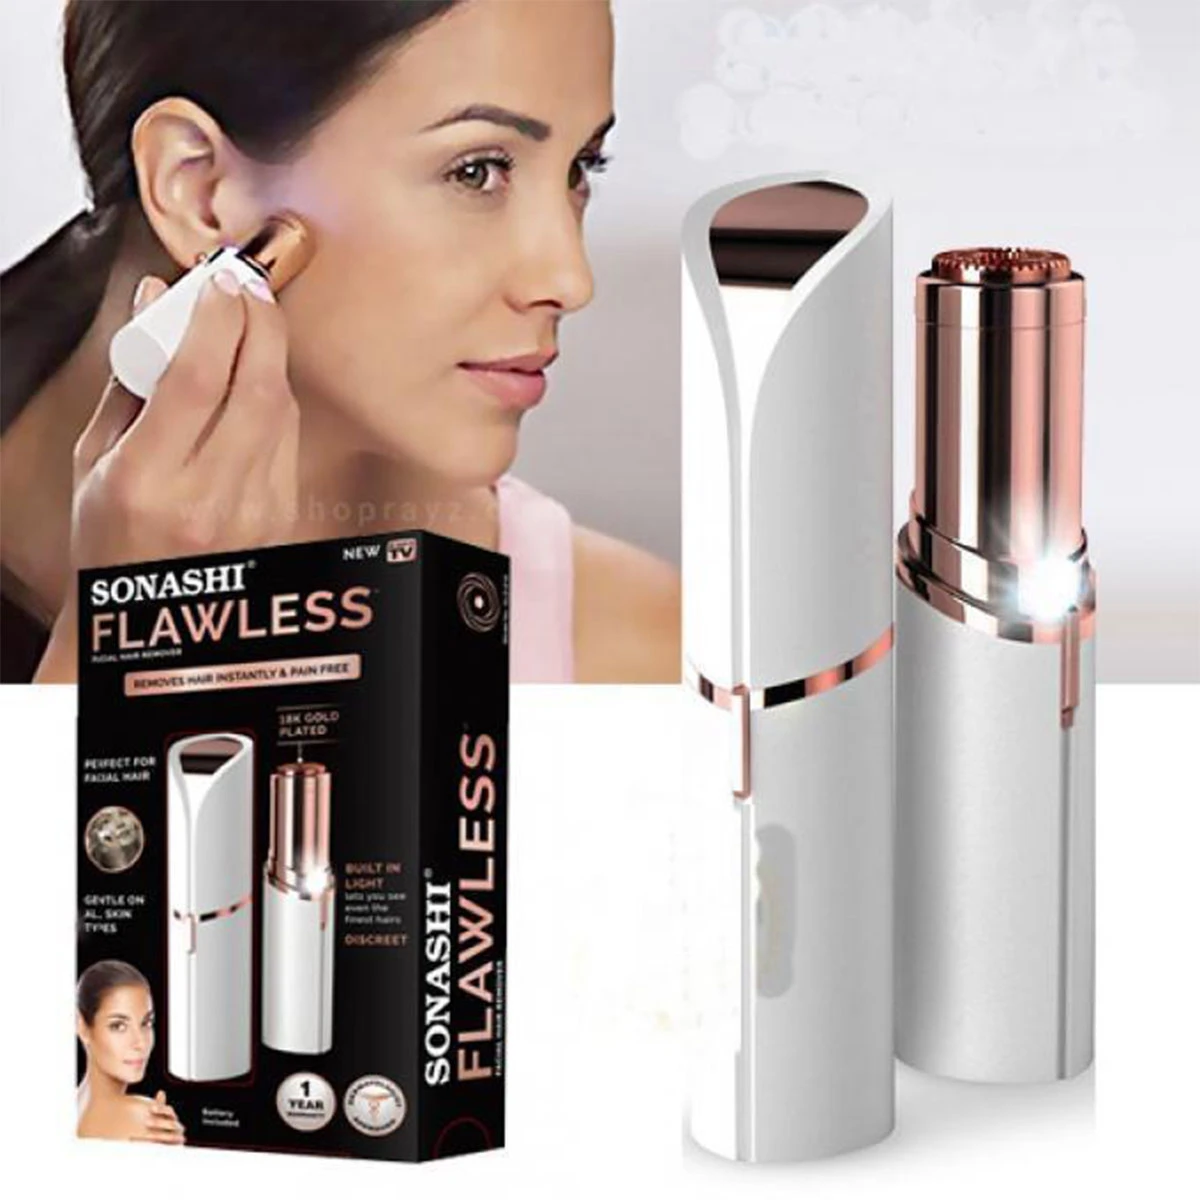 Flawless Women Painless Hair Remover Machine-USB Rechargeable